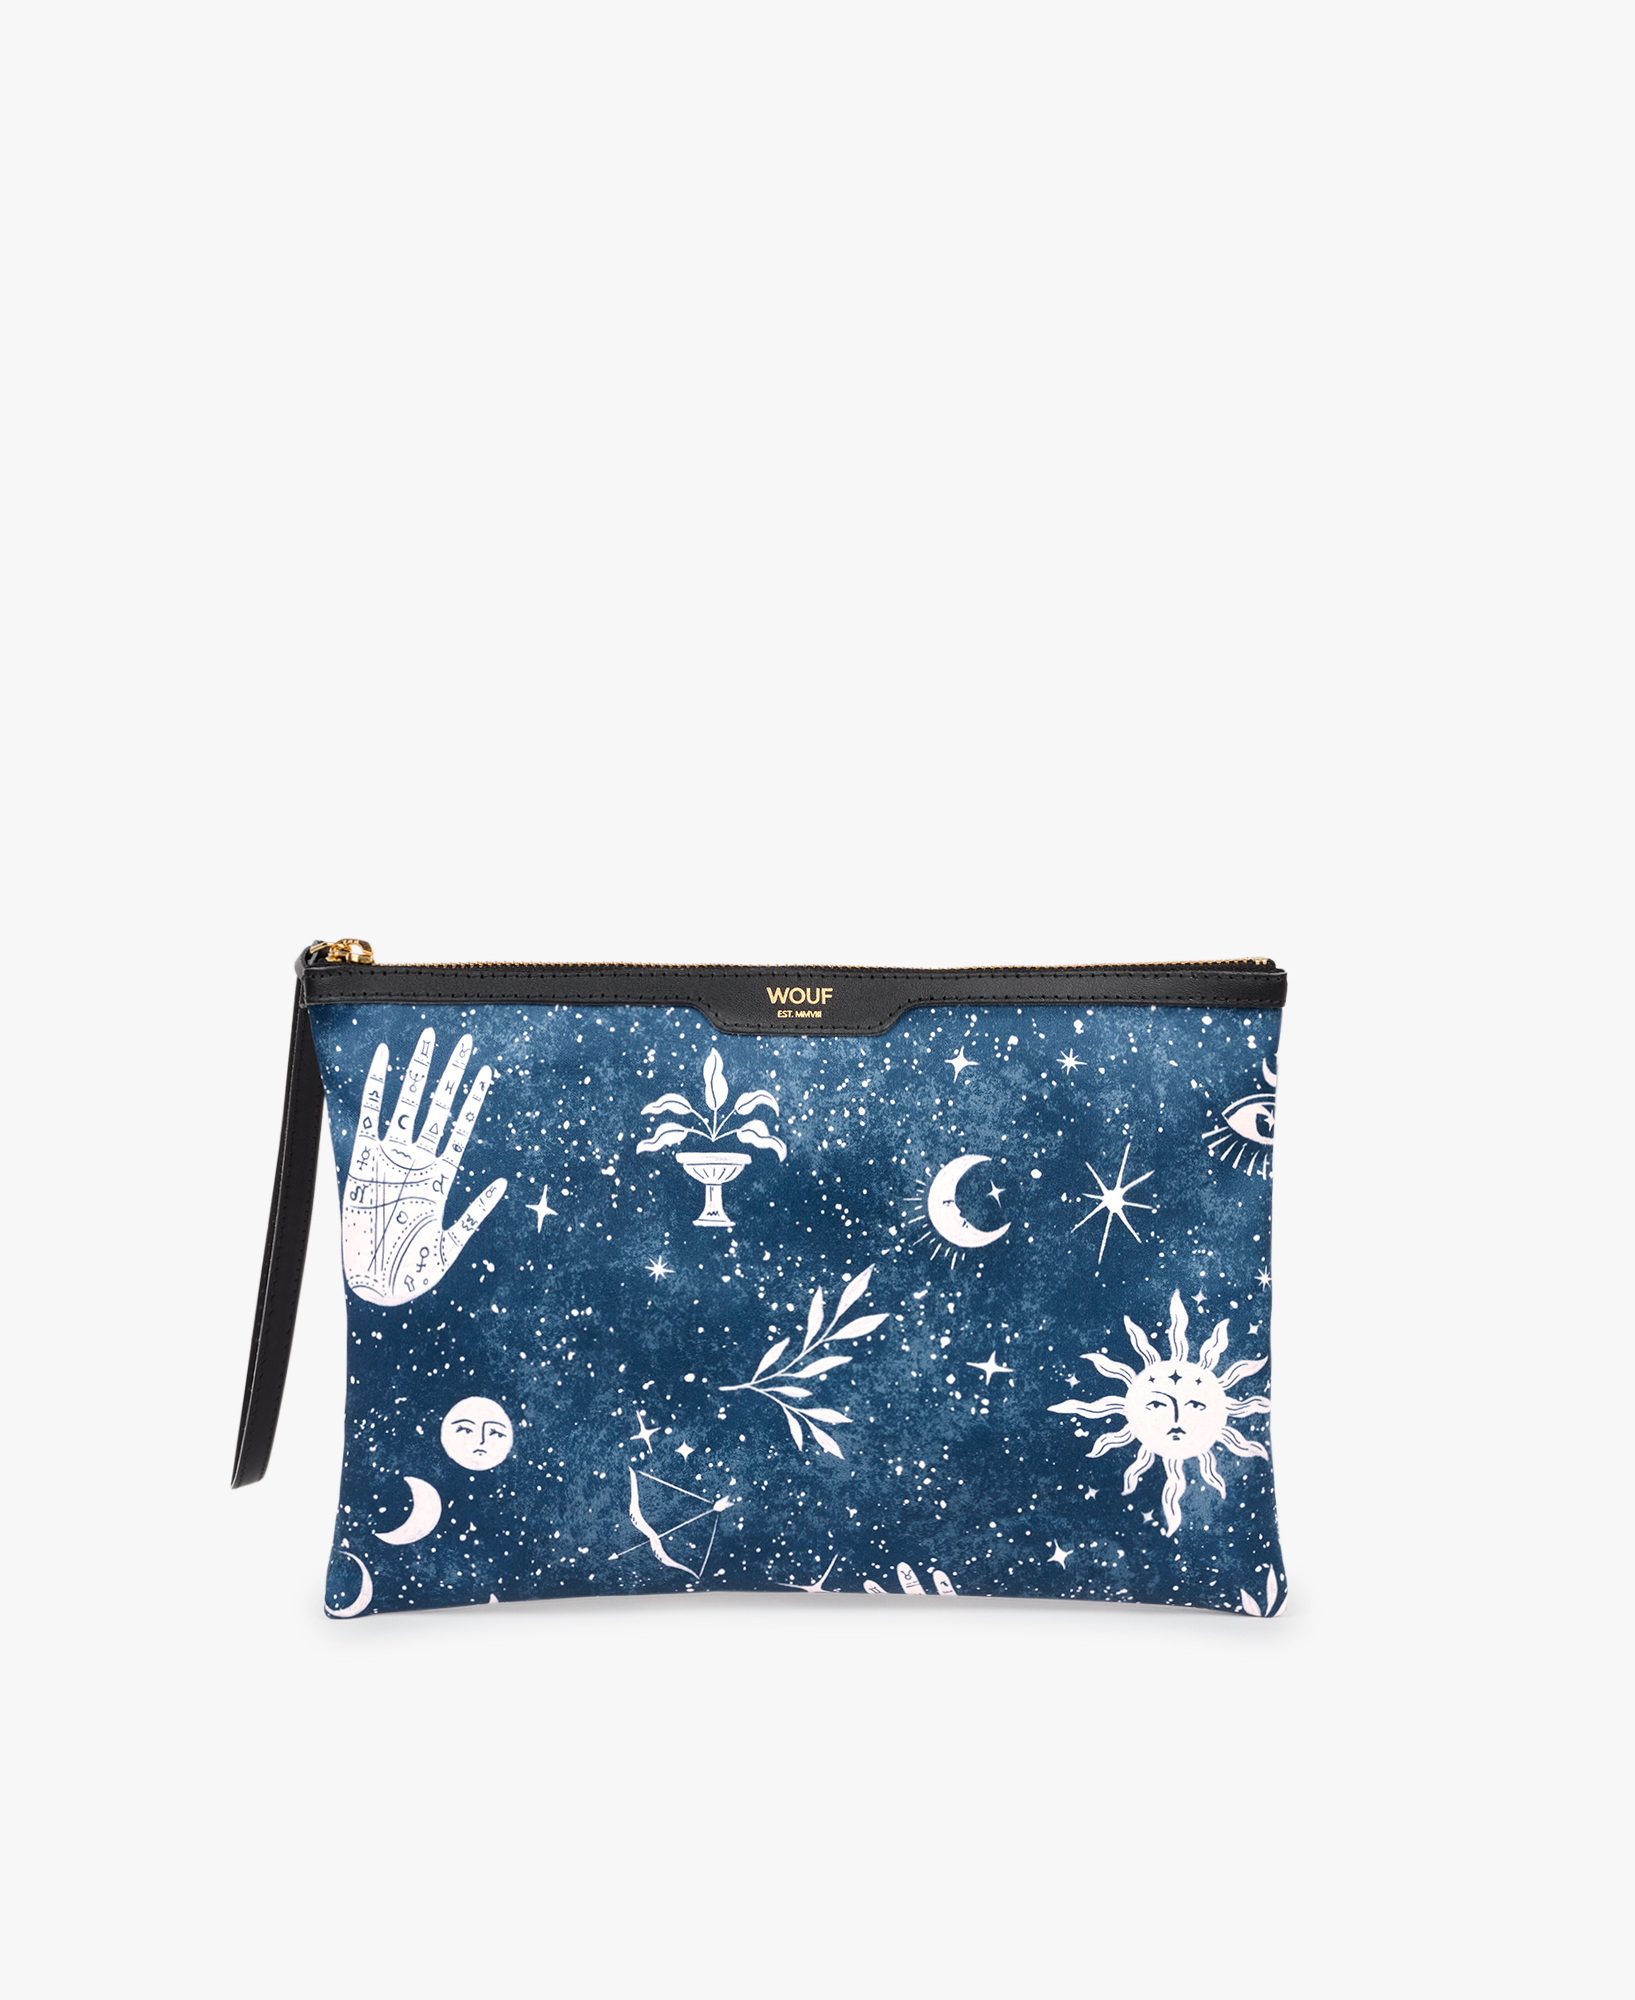 Wouf Esoteric Night Clutch